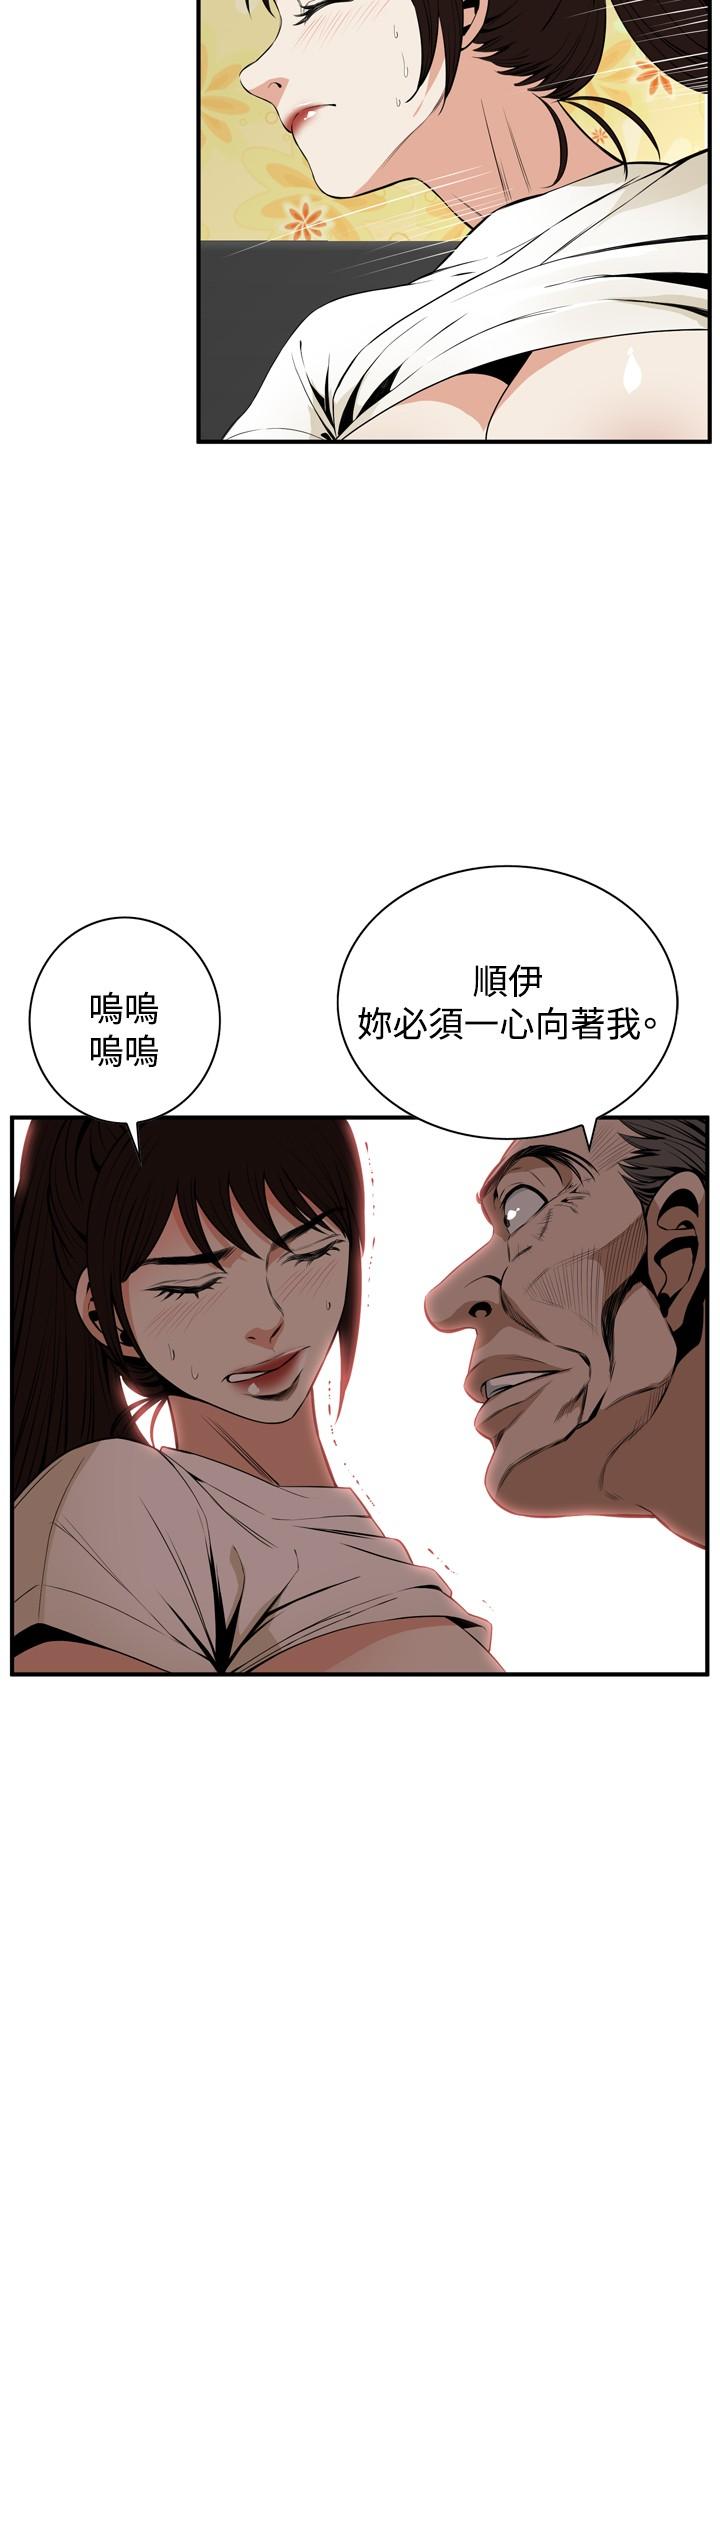 Adorable Take a Peek 偷窥 Ch.39~57 [Chinese]中文 Cfnm - Page 10